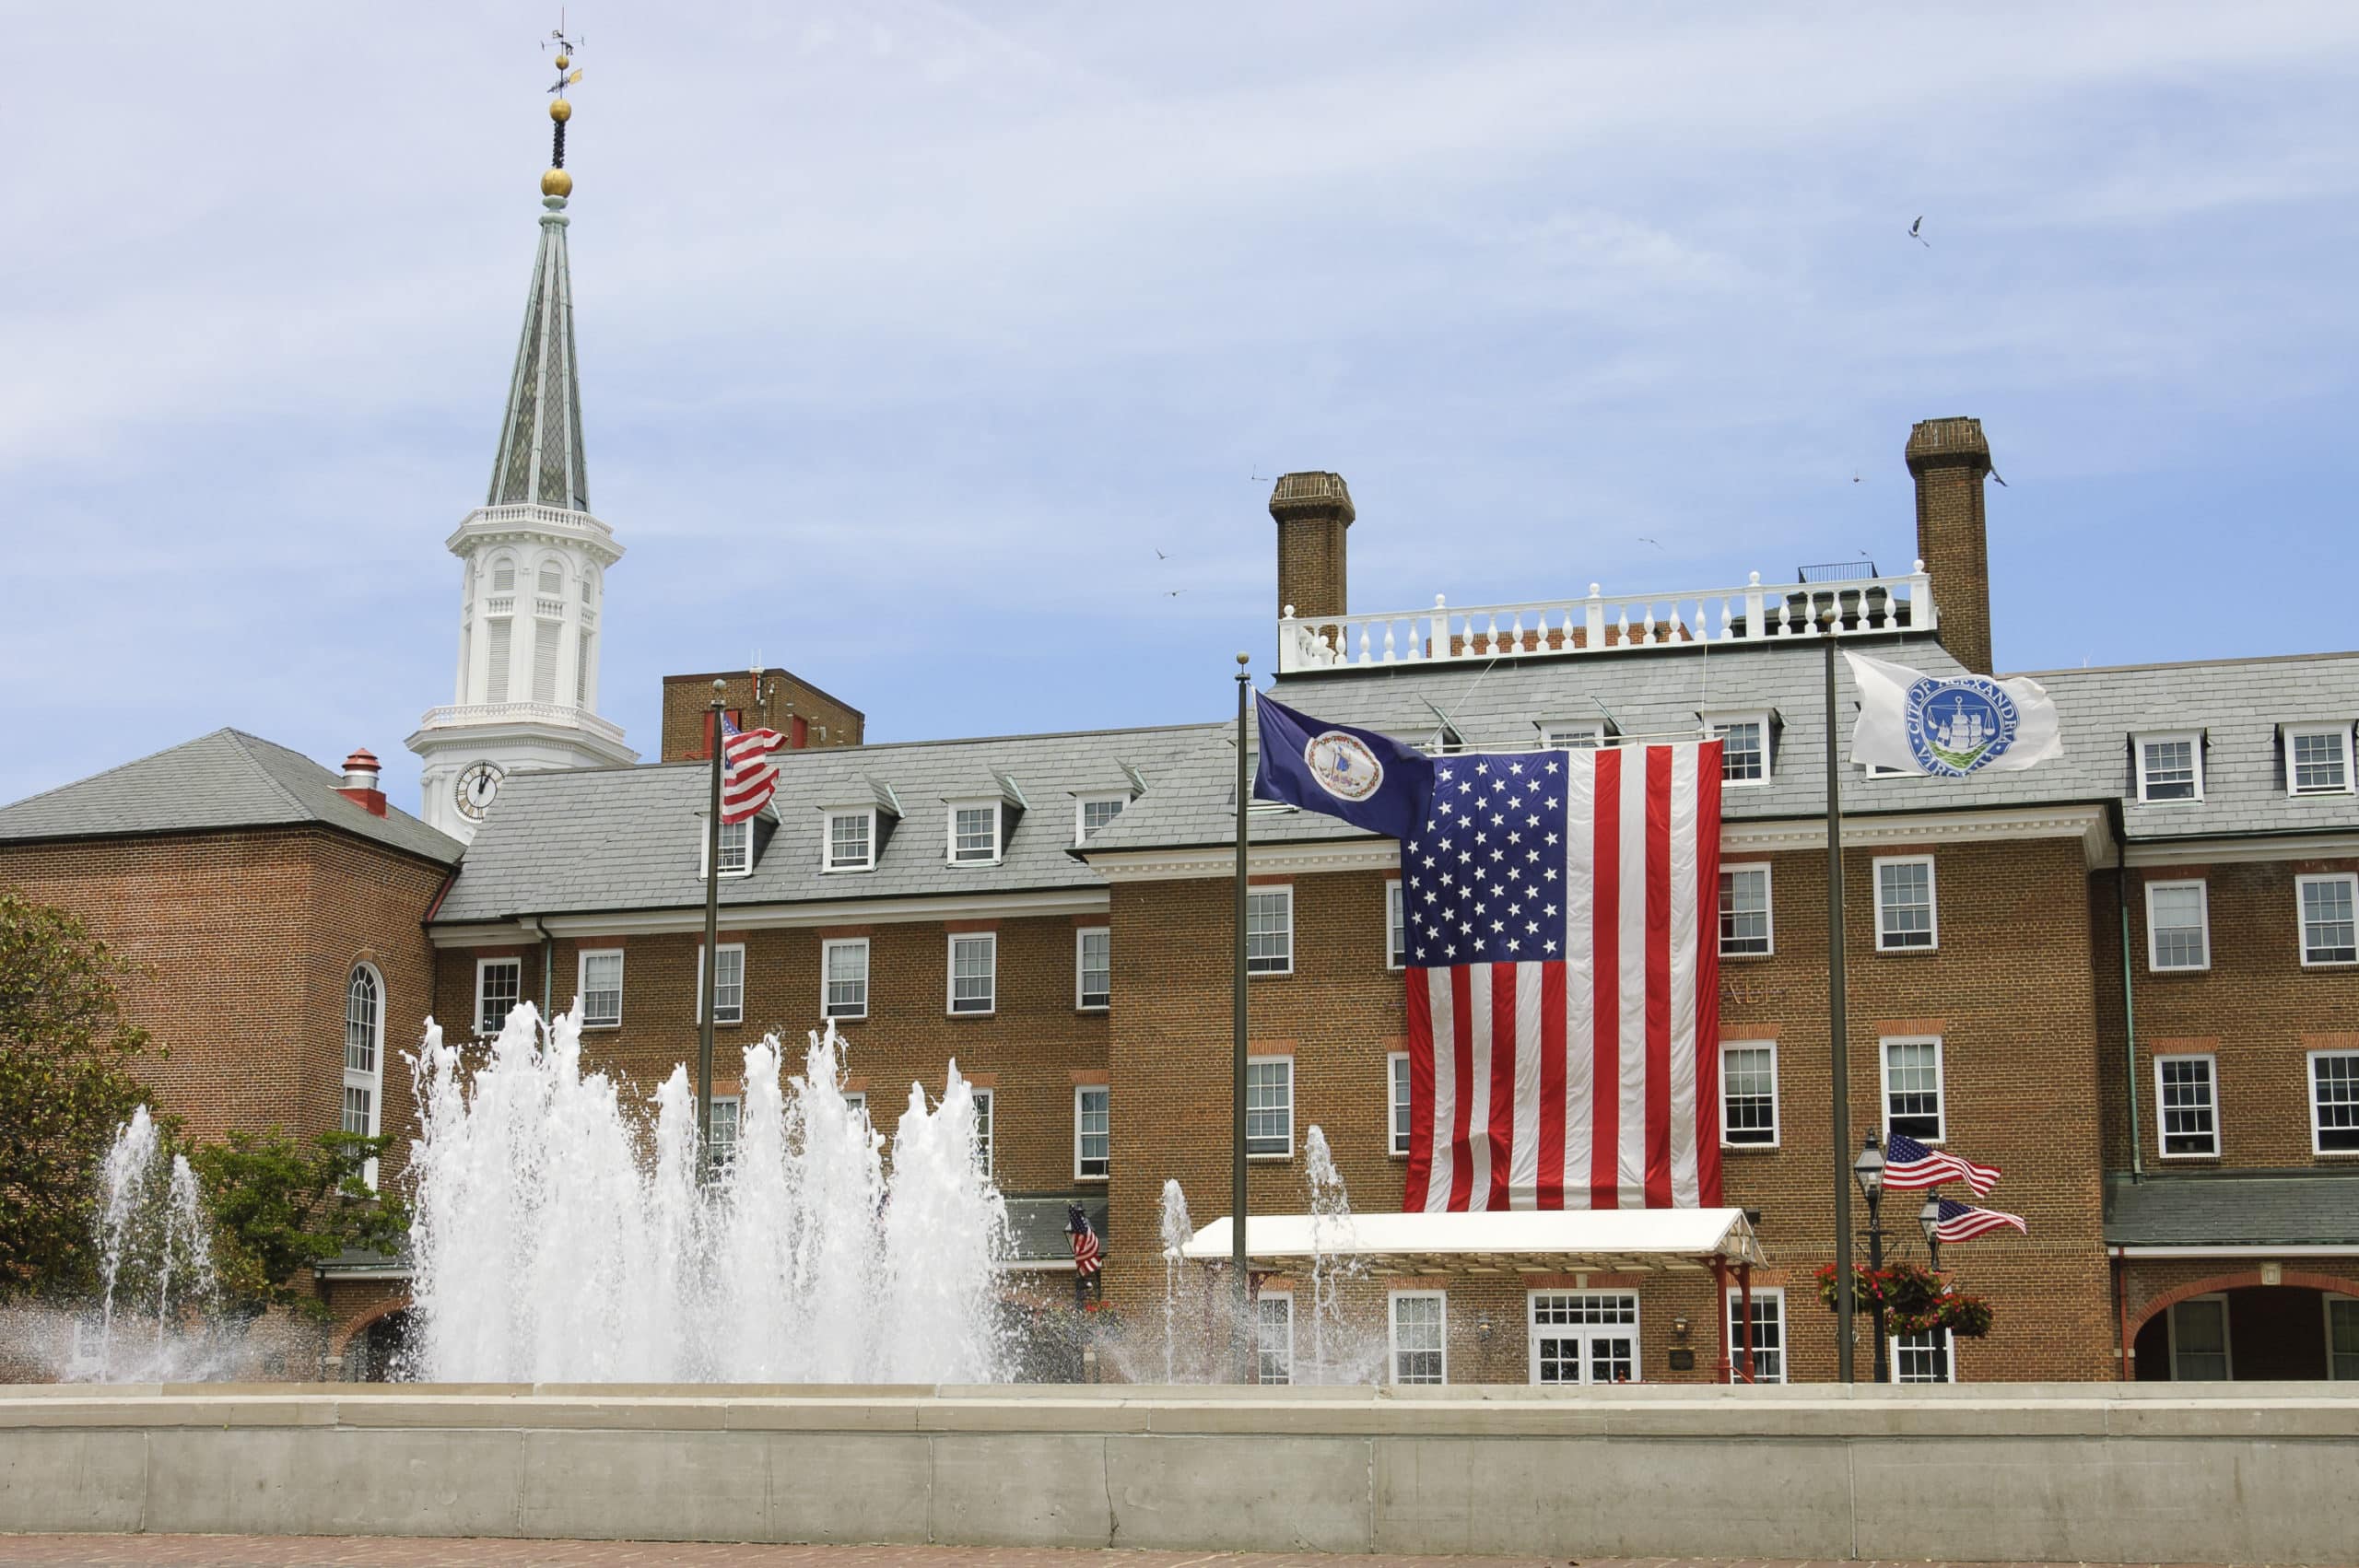 City hall front view and the largest  American flag ever seen in Alexandria city, Virginia, USA